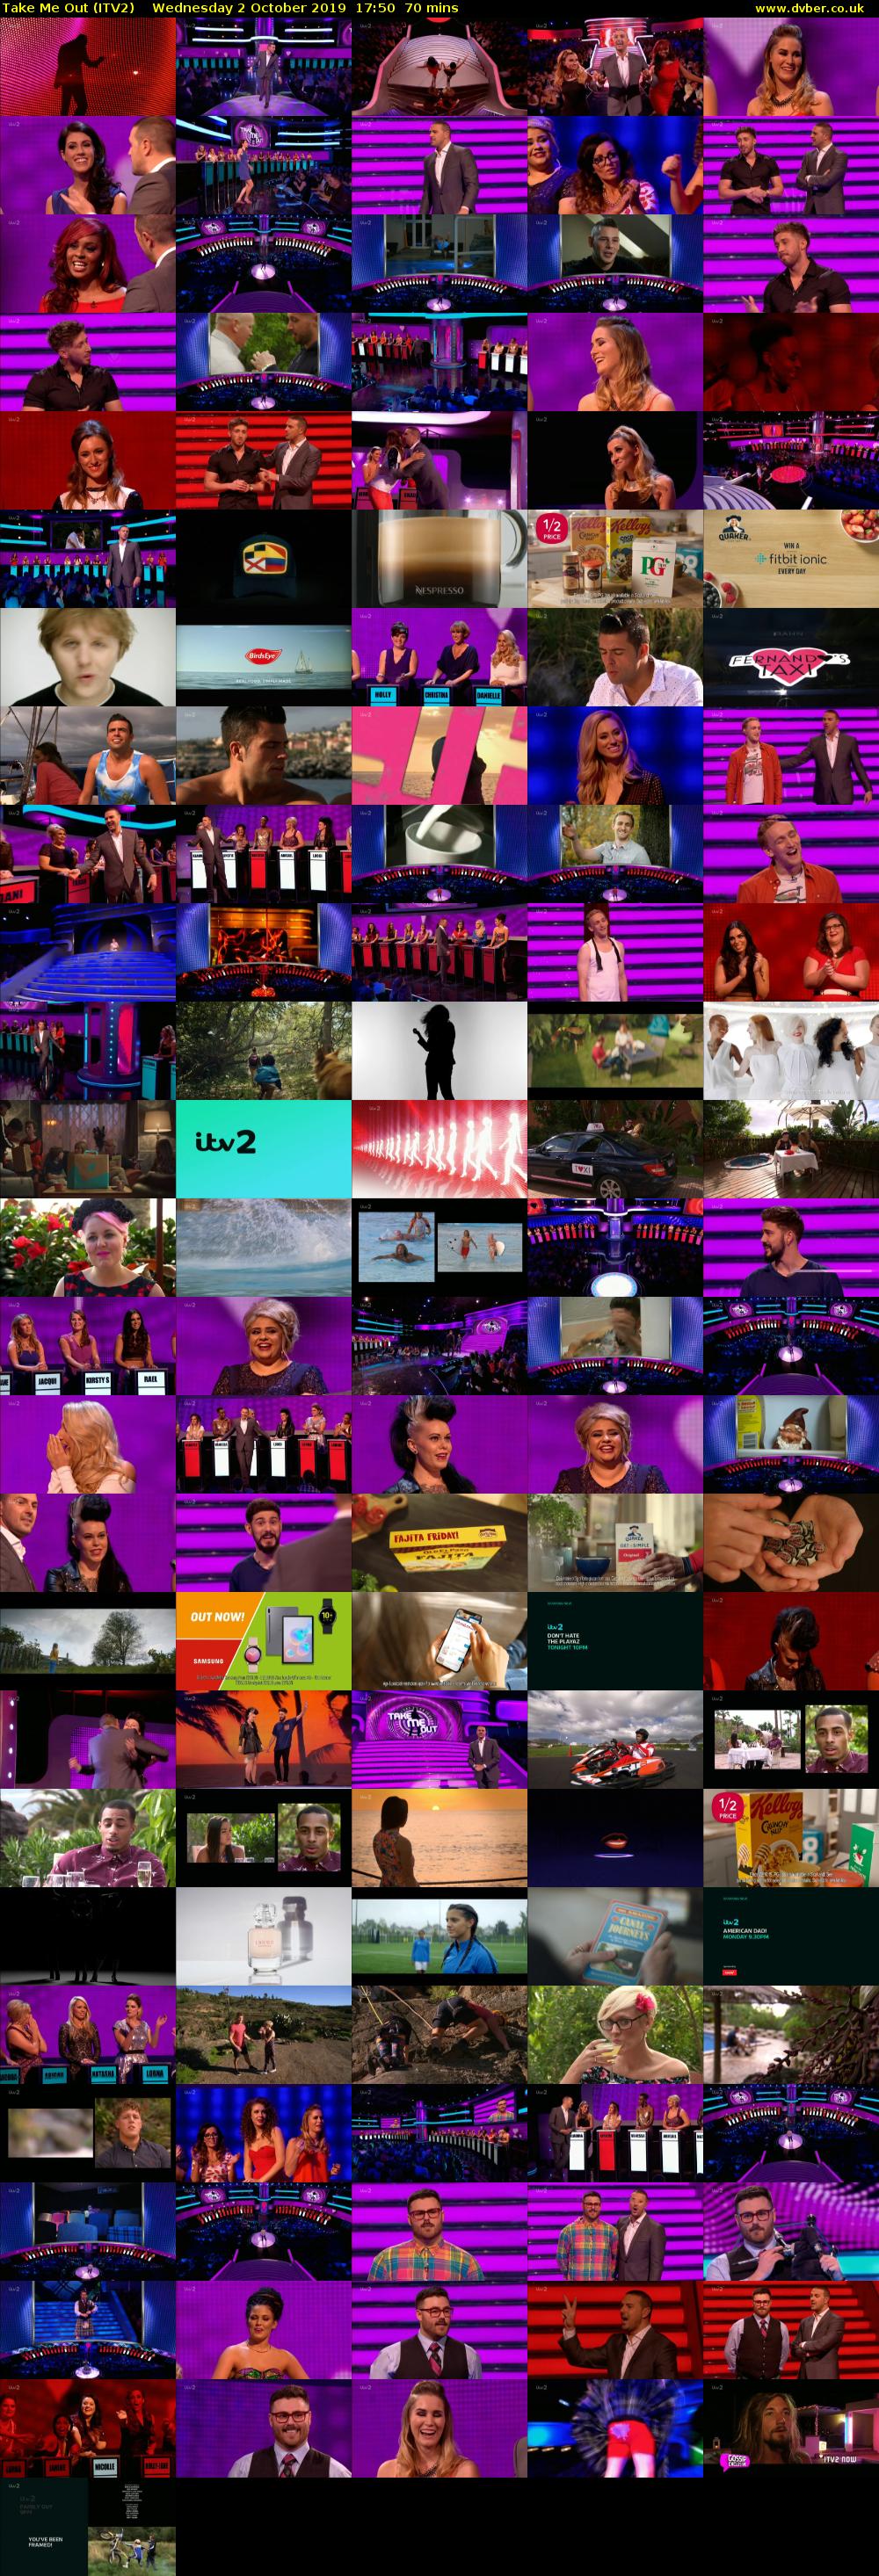 Take Me Out (ITV2) Wednesday 2 October 2019 17:50 - 19:00